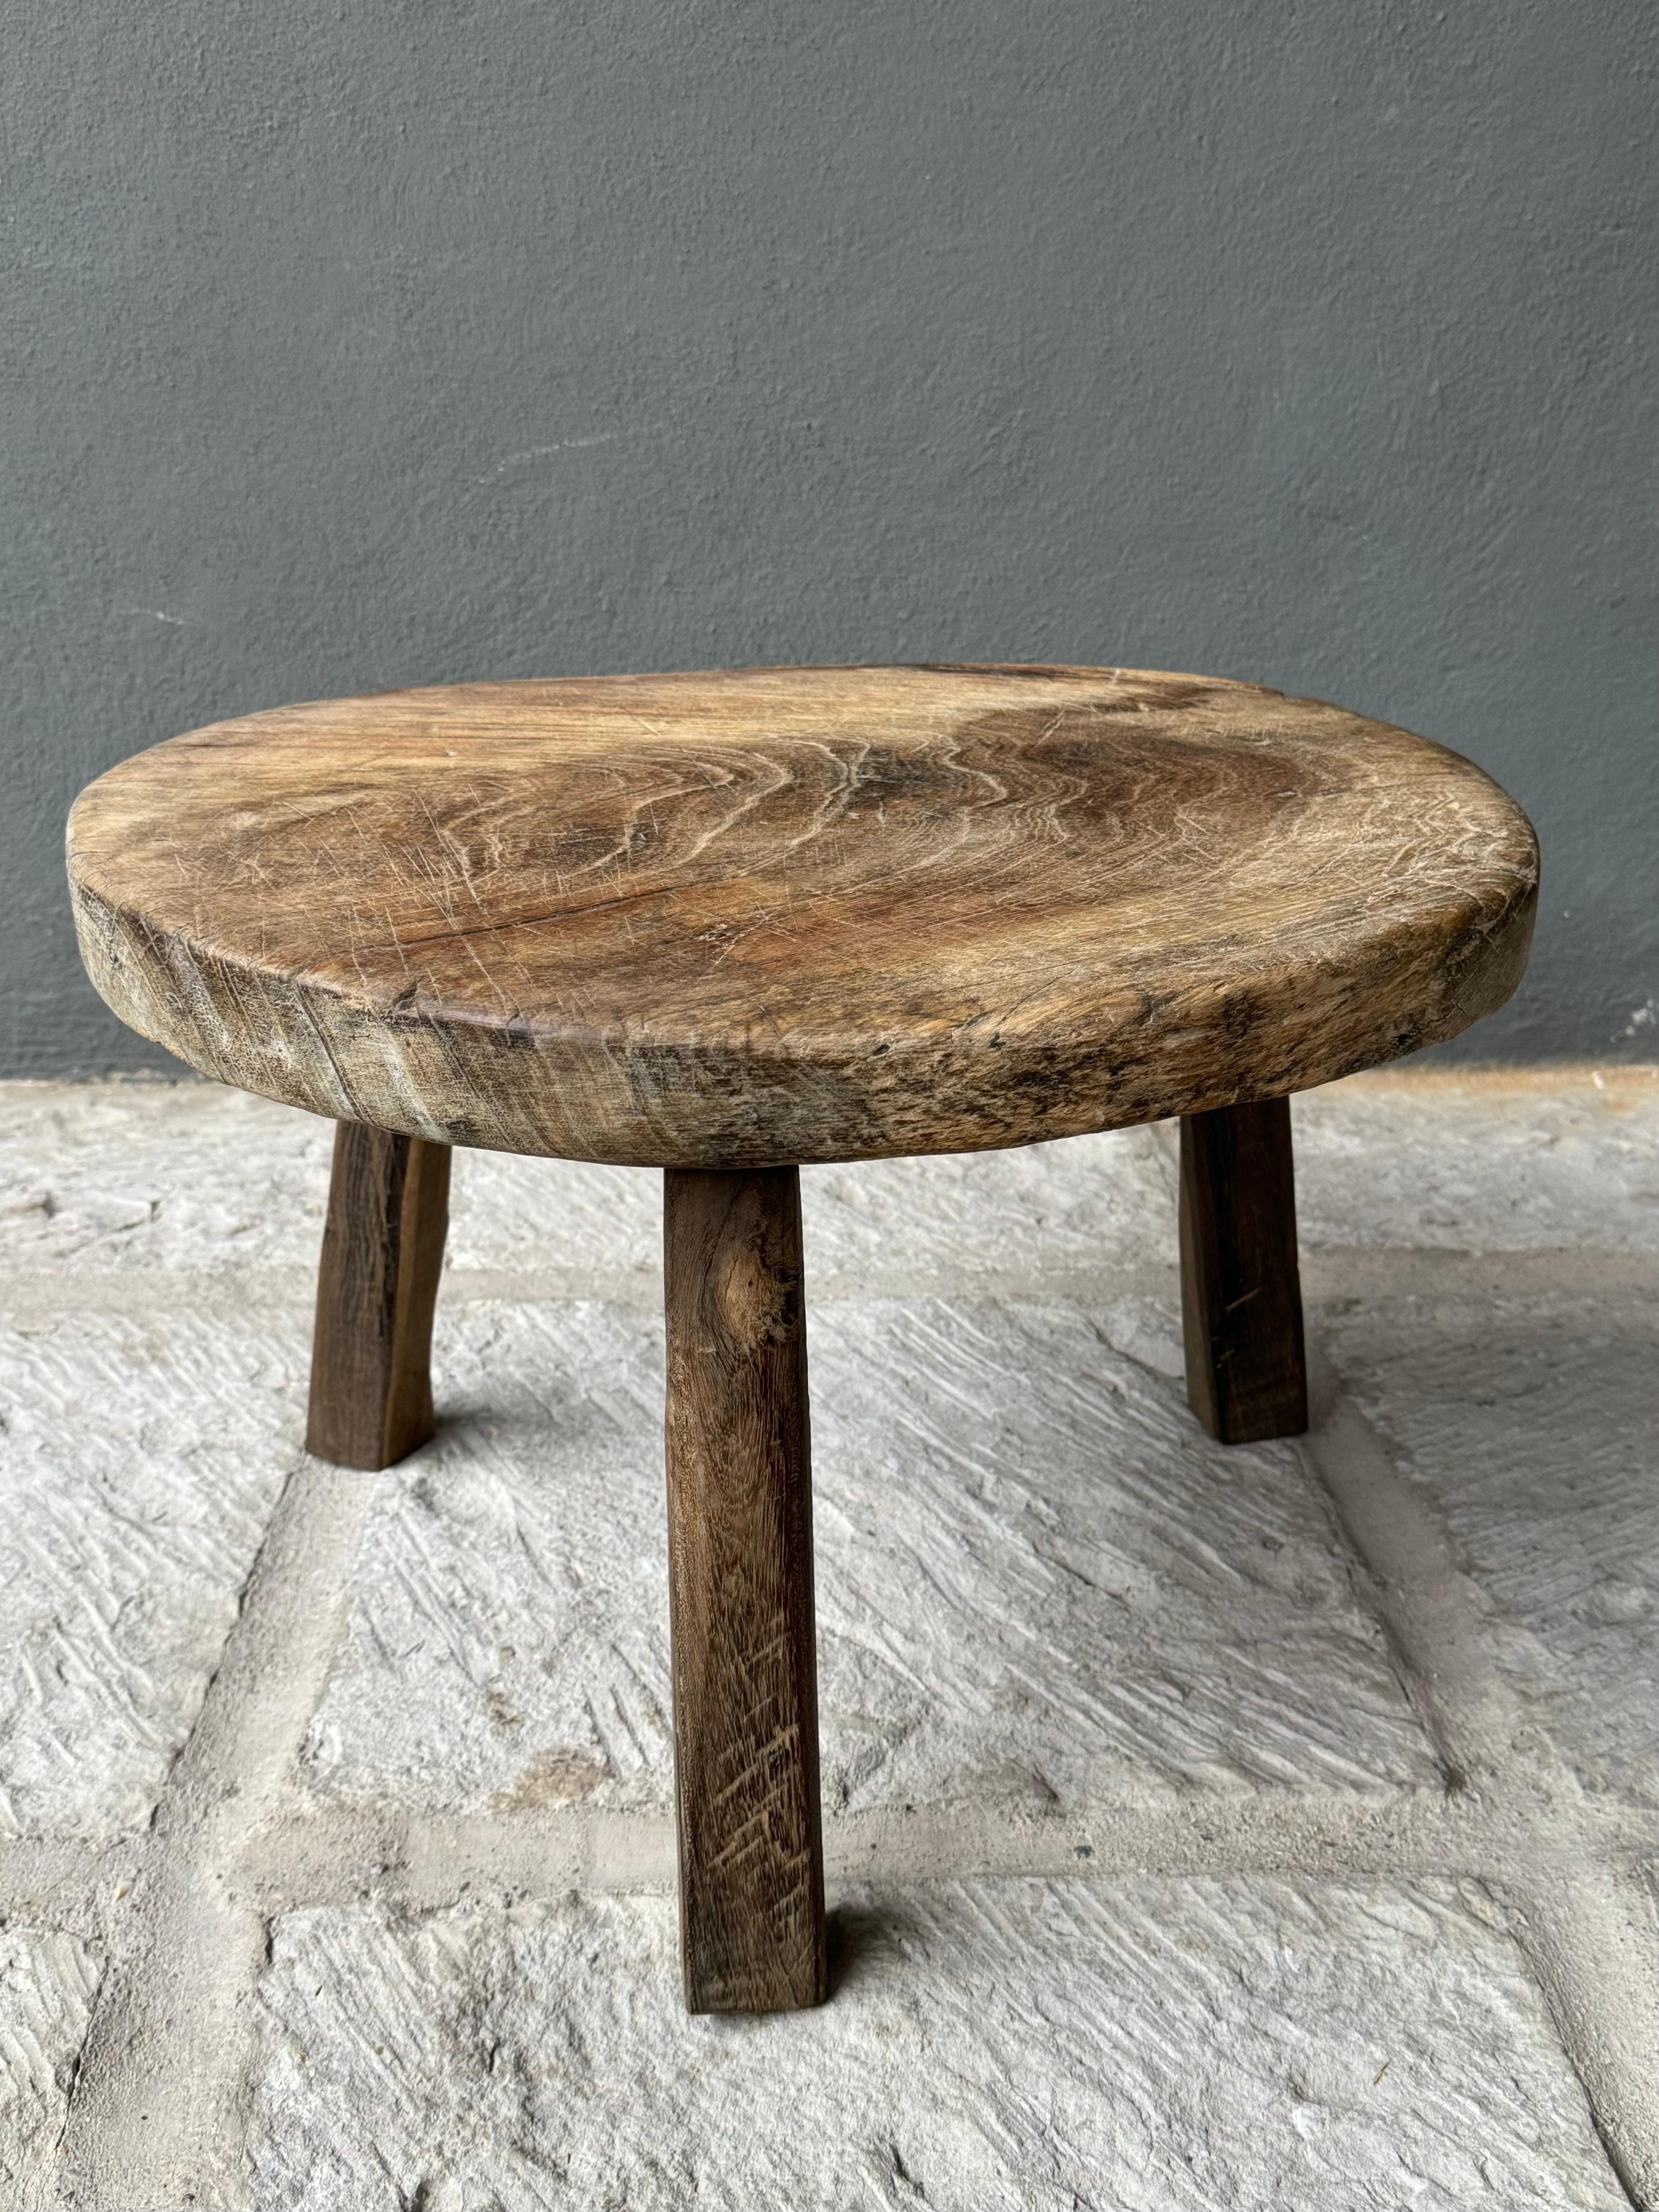 Hand-Carved Primitive Hardwood Round Table From Central Yucatan, Mexico, Late 20th Century For Sale